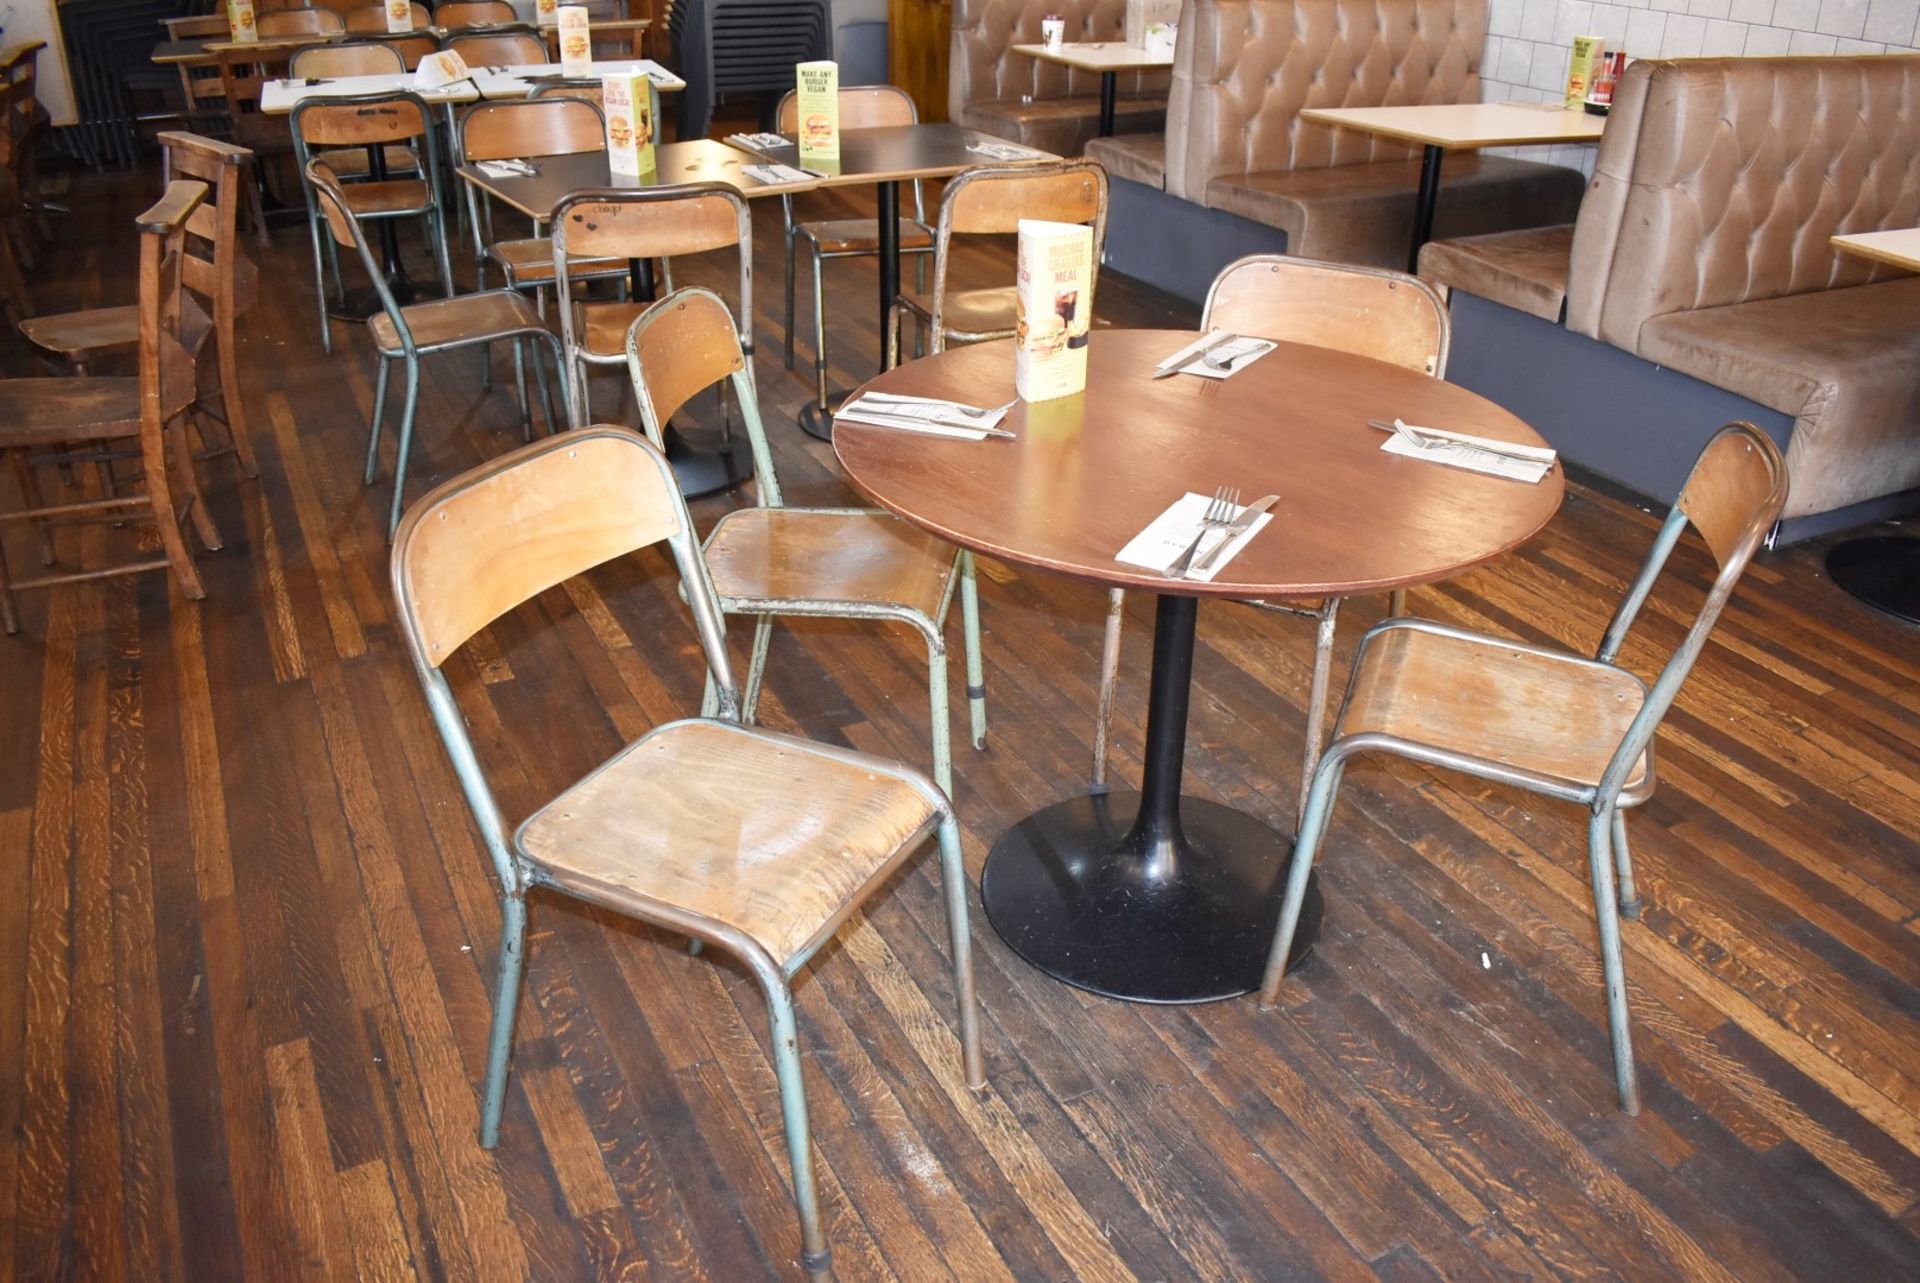 8 x Vintage Stackable School Chairs With Tubular Bent Steel Frames and Curved Plywood Seats - Image 3 of 8